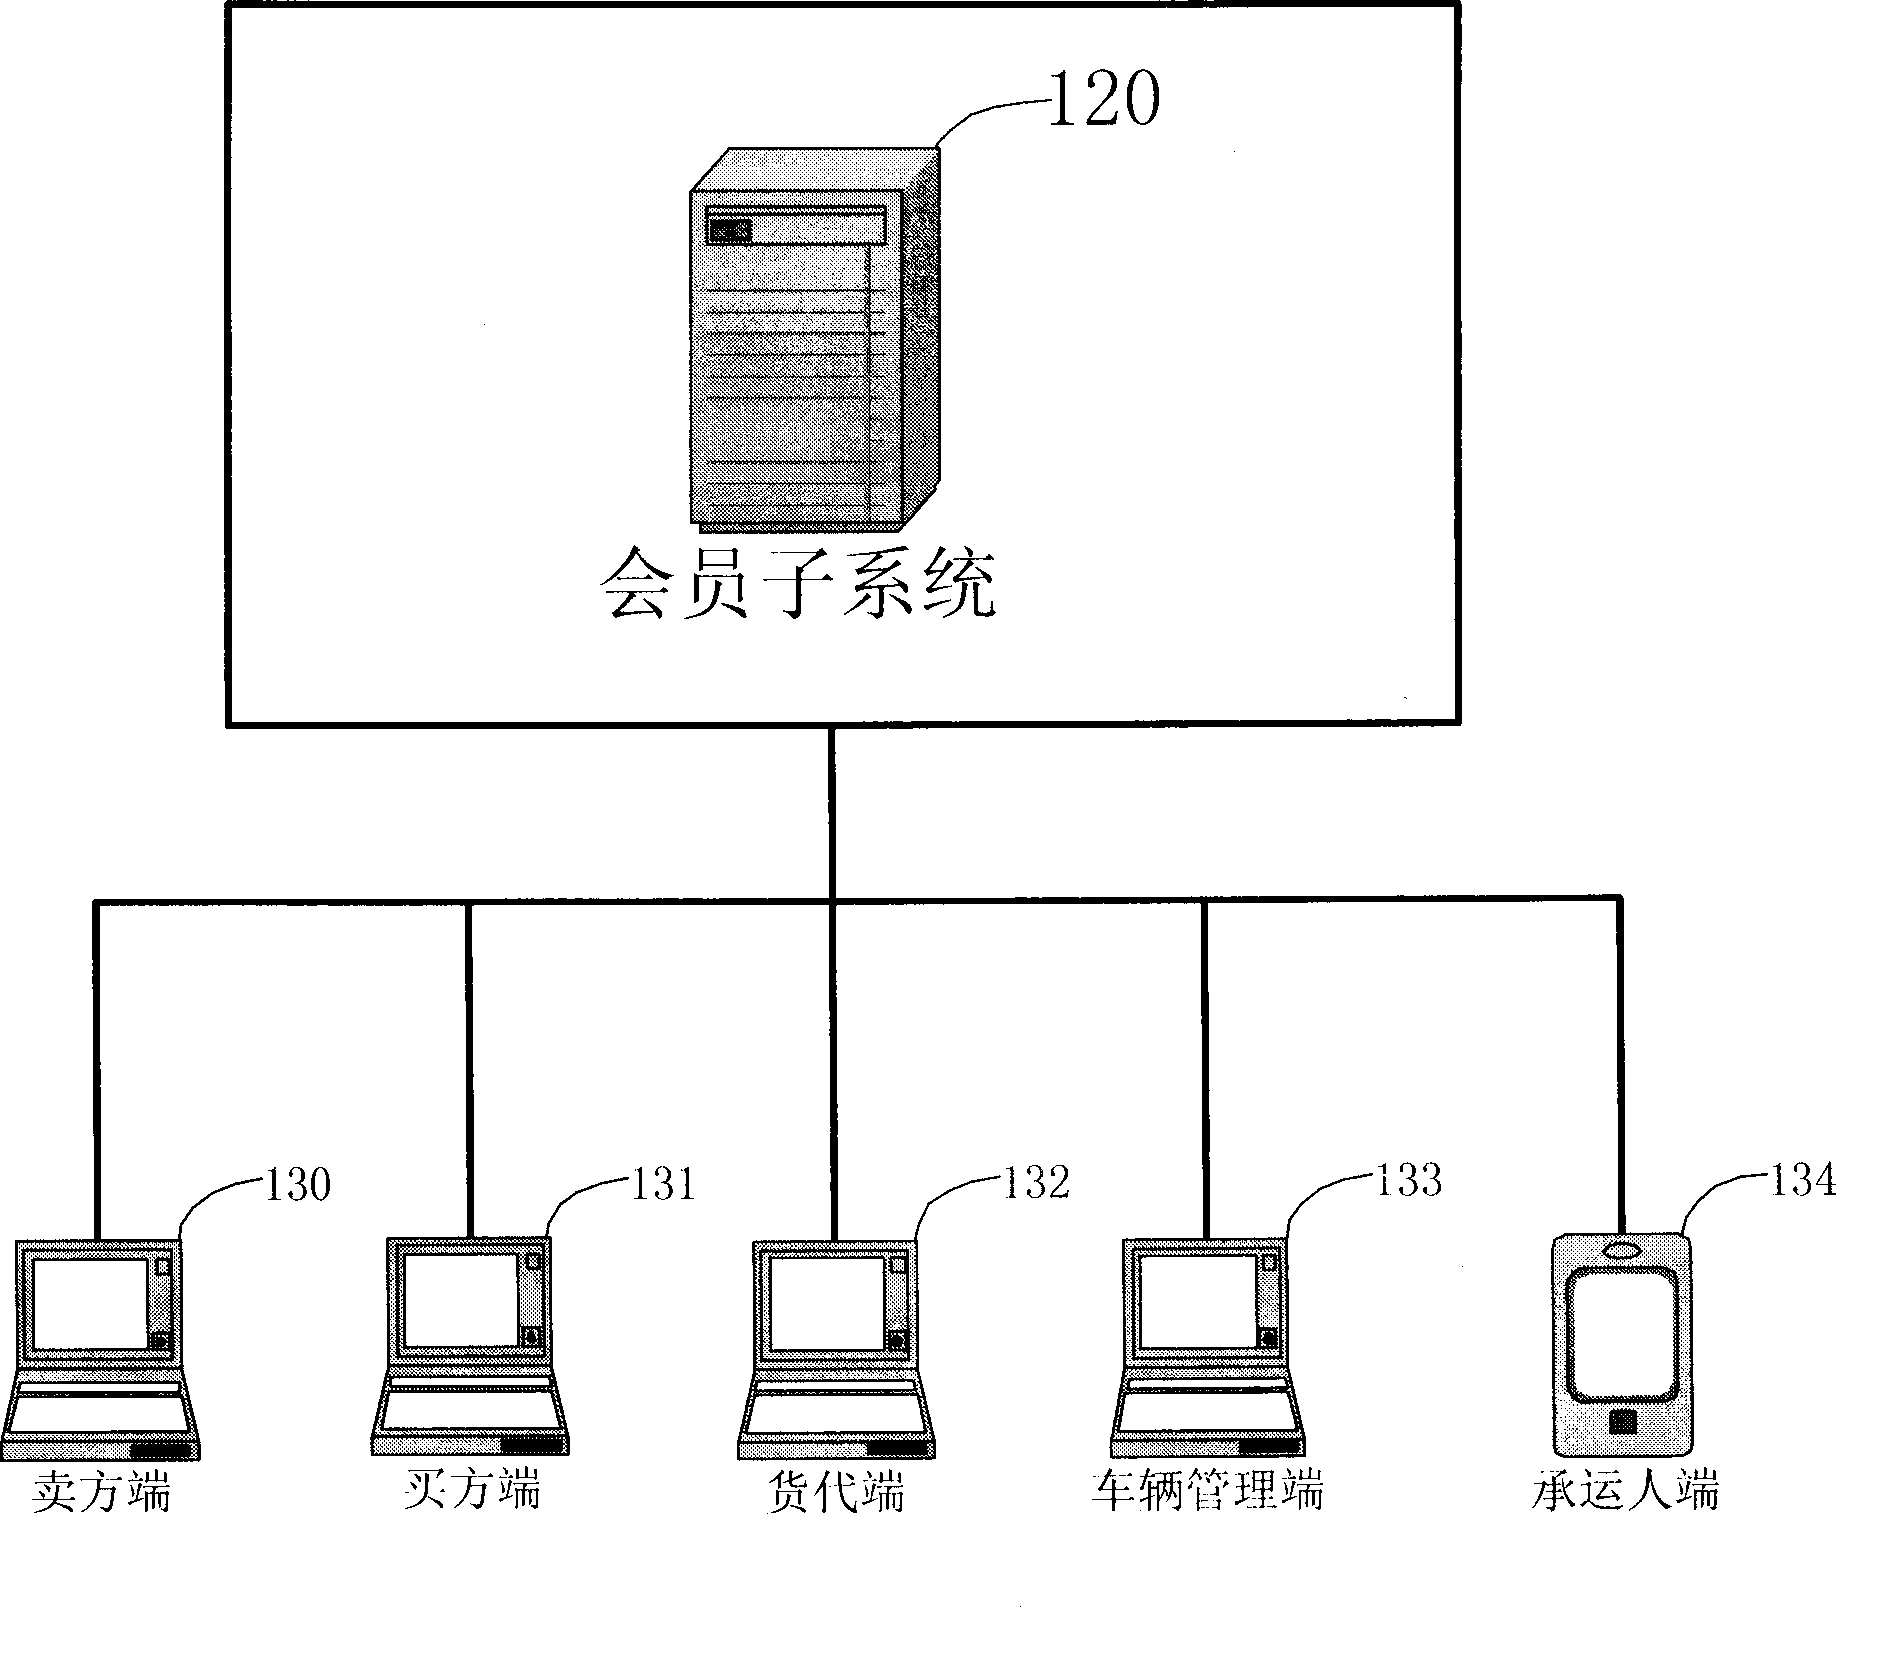 Supply chain management system and method